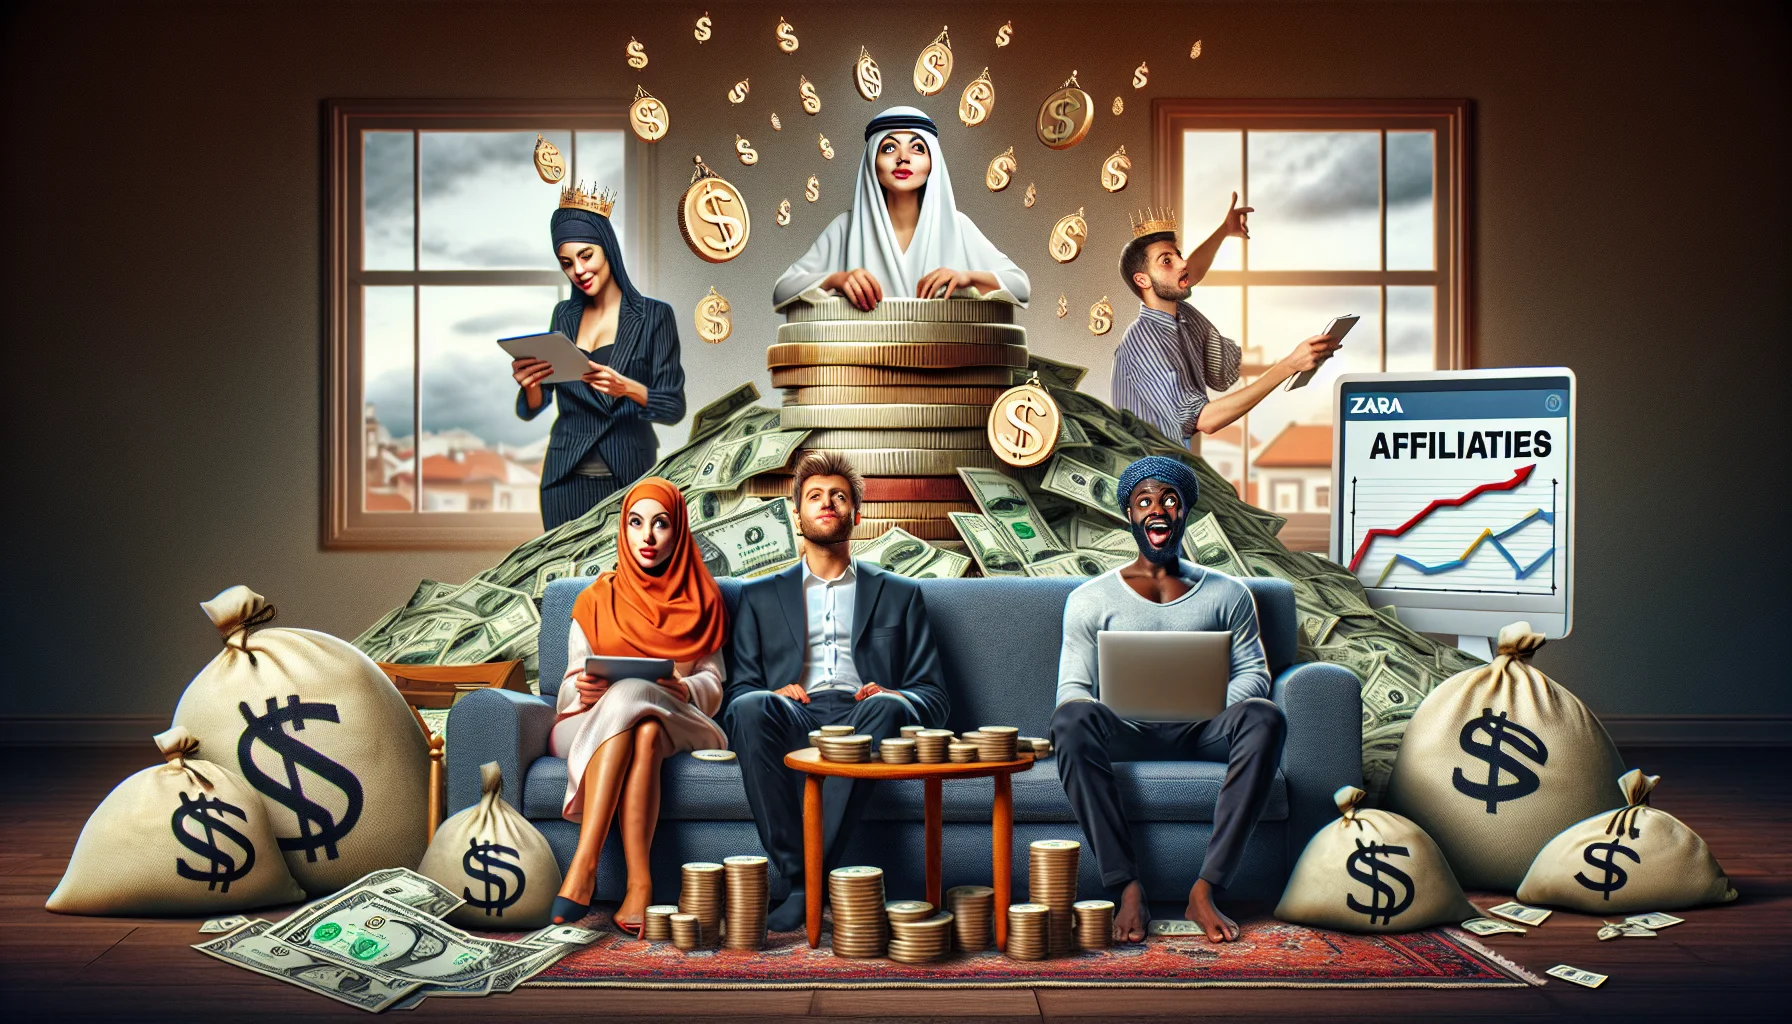 A humorous and realistic interpretation of an online money making opportunity through an affiliate program. It's a home setup, with a diverse group of individuals. The scene includes a Middle-Eastern woman staring at a computer screen crowned with dollar signs, a Caucasian man reclining on a sofa, exploring 'affiliates' on a tablet, and a Black man excitedly highlighting a growth chart. In the background, it's raining money. Heap of coins are placed around, forming the word 'Zara'. This exciting scene subtly hints at the potential for financial success with the Zara affiliate program.